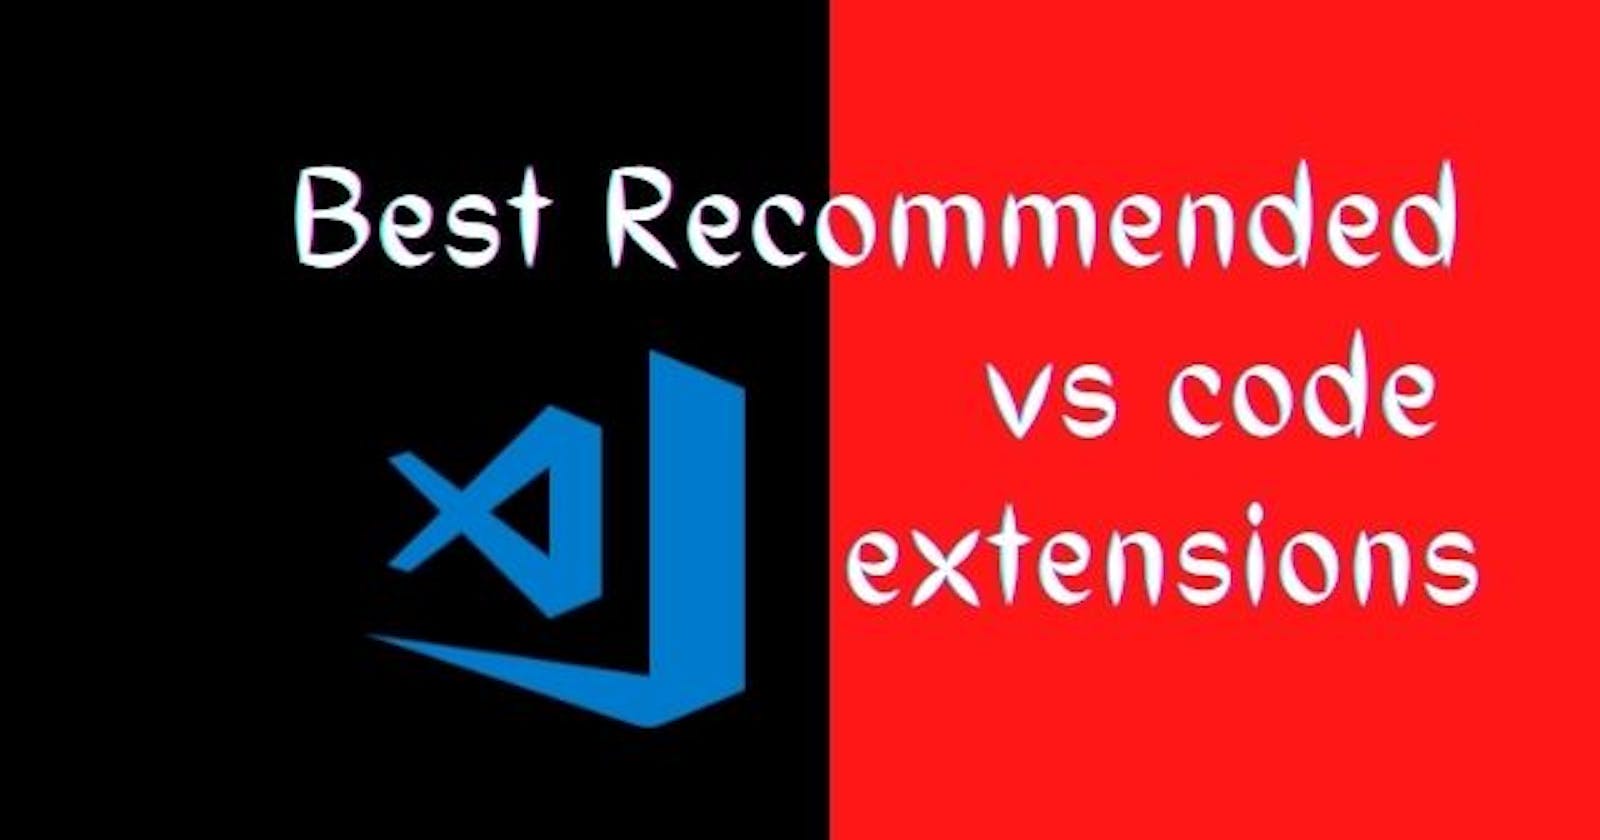 Top 10 Recommended VS Code Extensions for Web Development